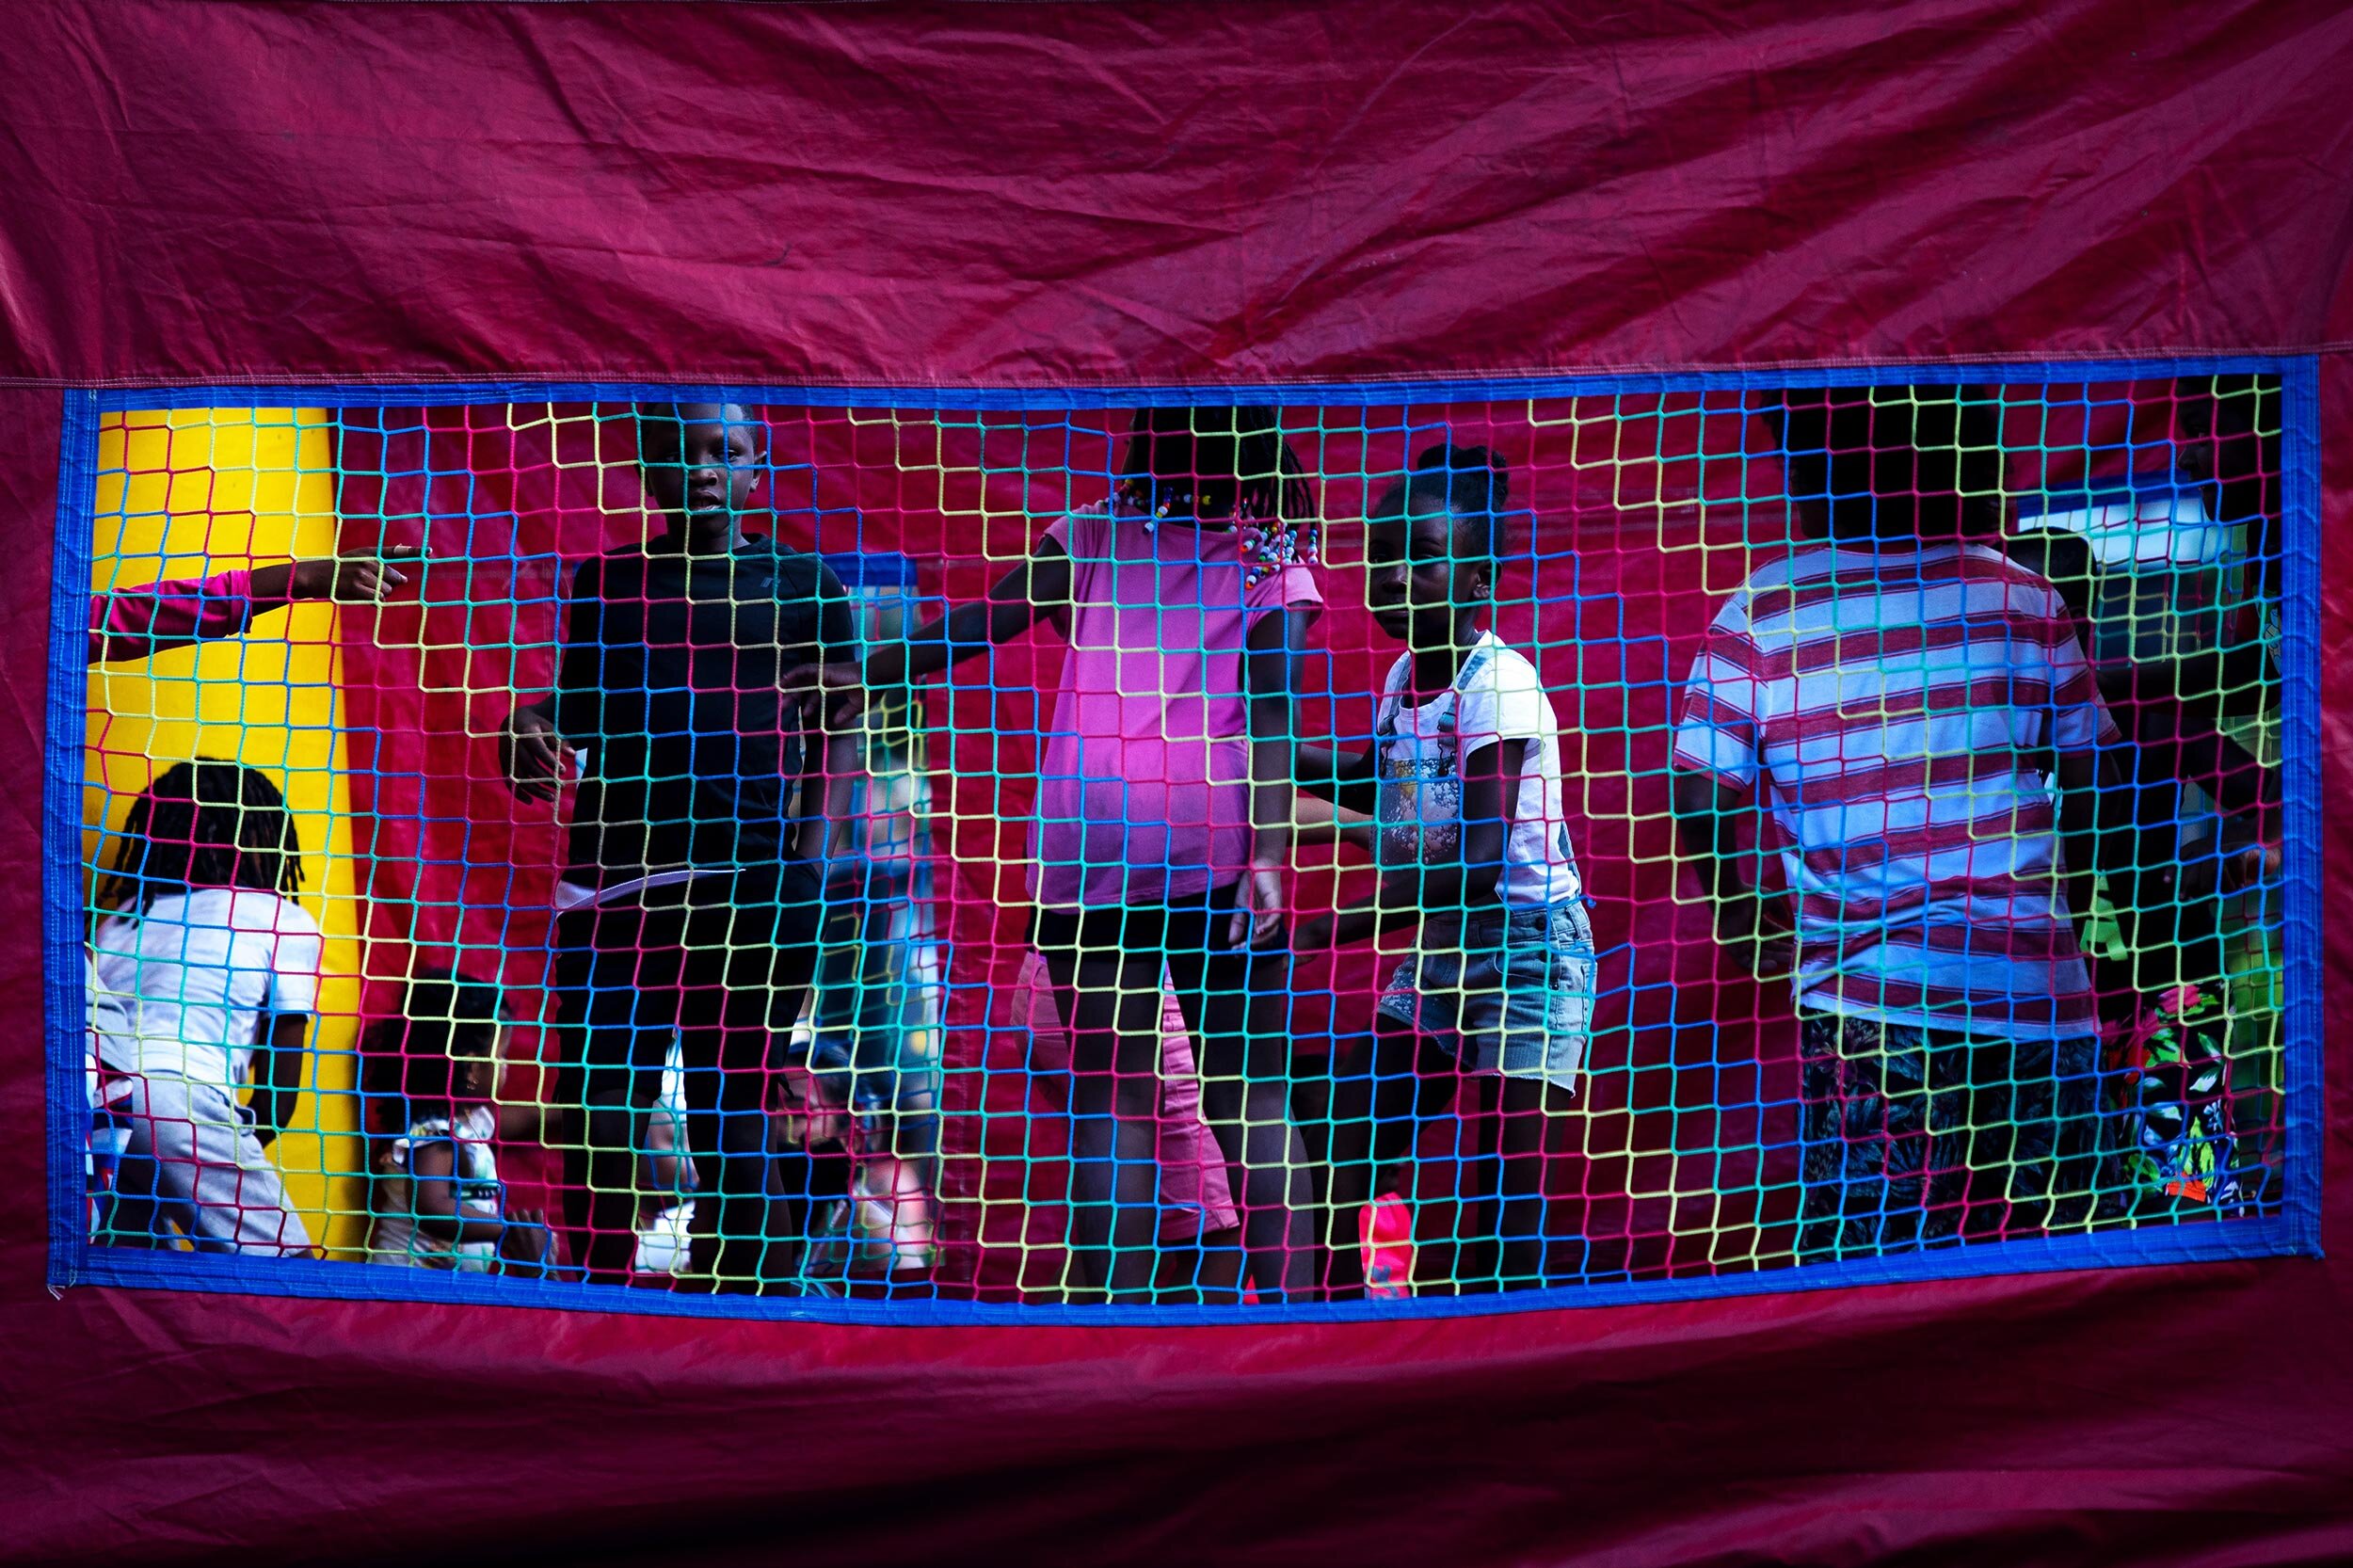   Children play in a bounce pay house at the Avenue D and East 38 Block Party in Brooklyn, New York.  